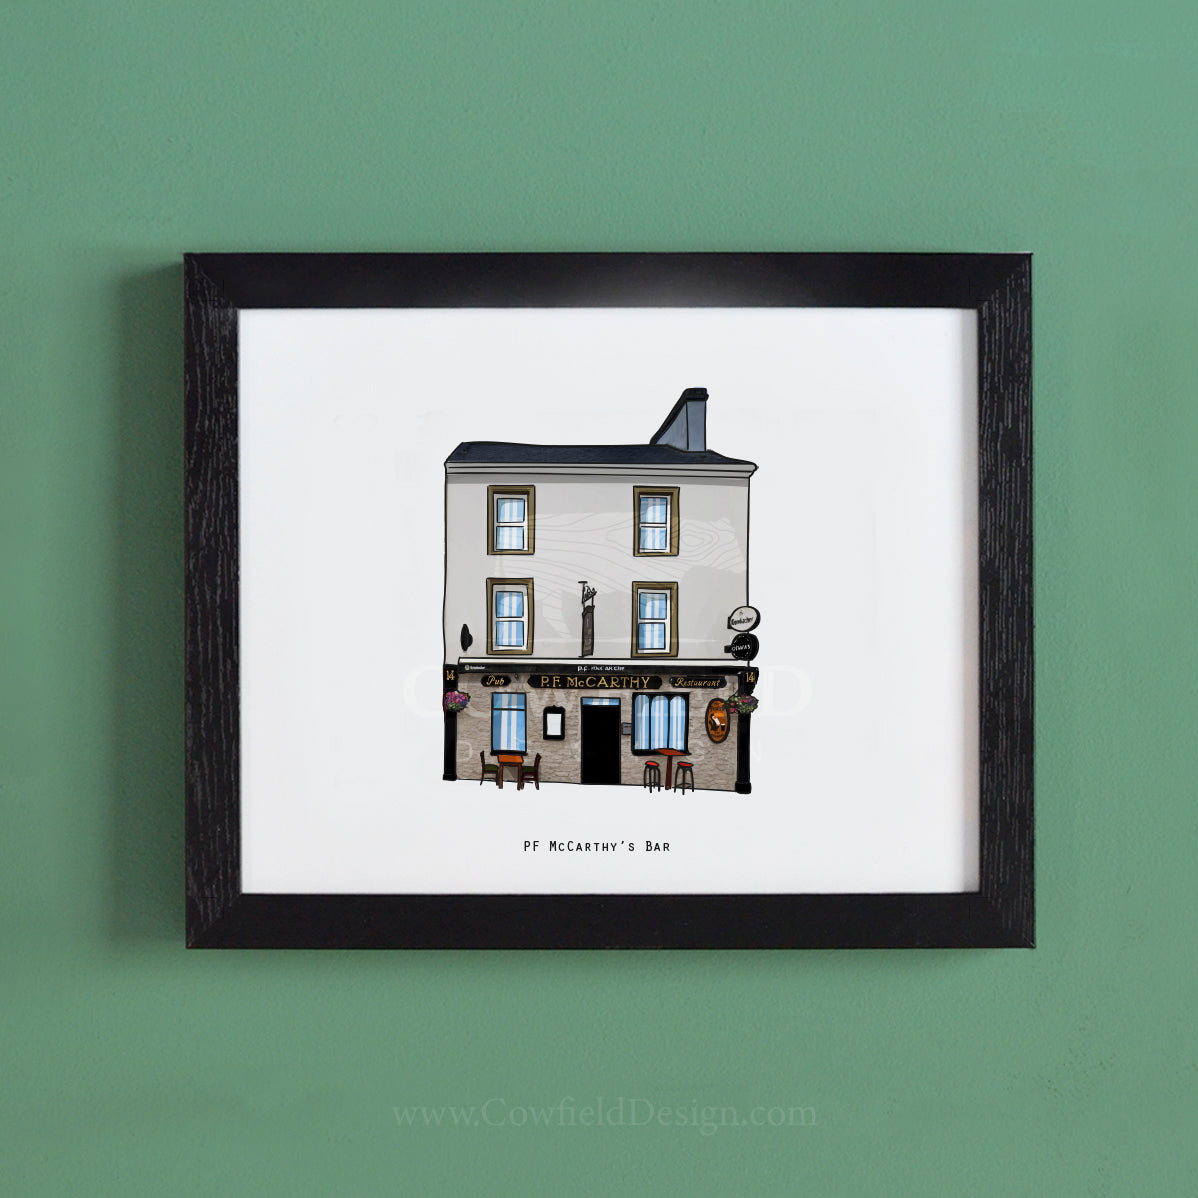 PF McCarthy's Bar Illustrated Pubs of Kerry